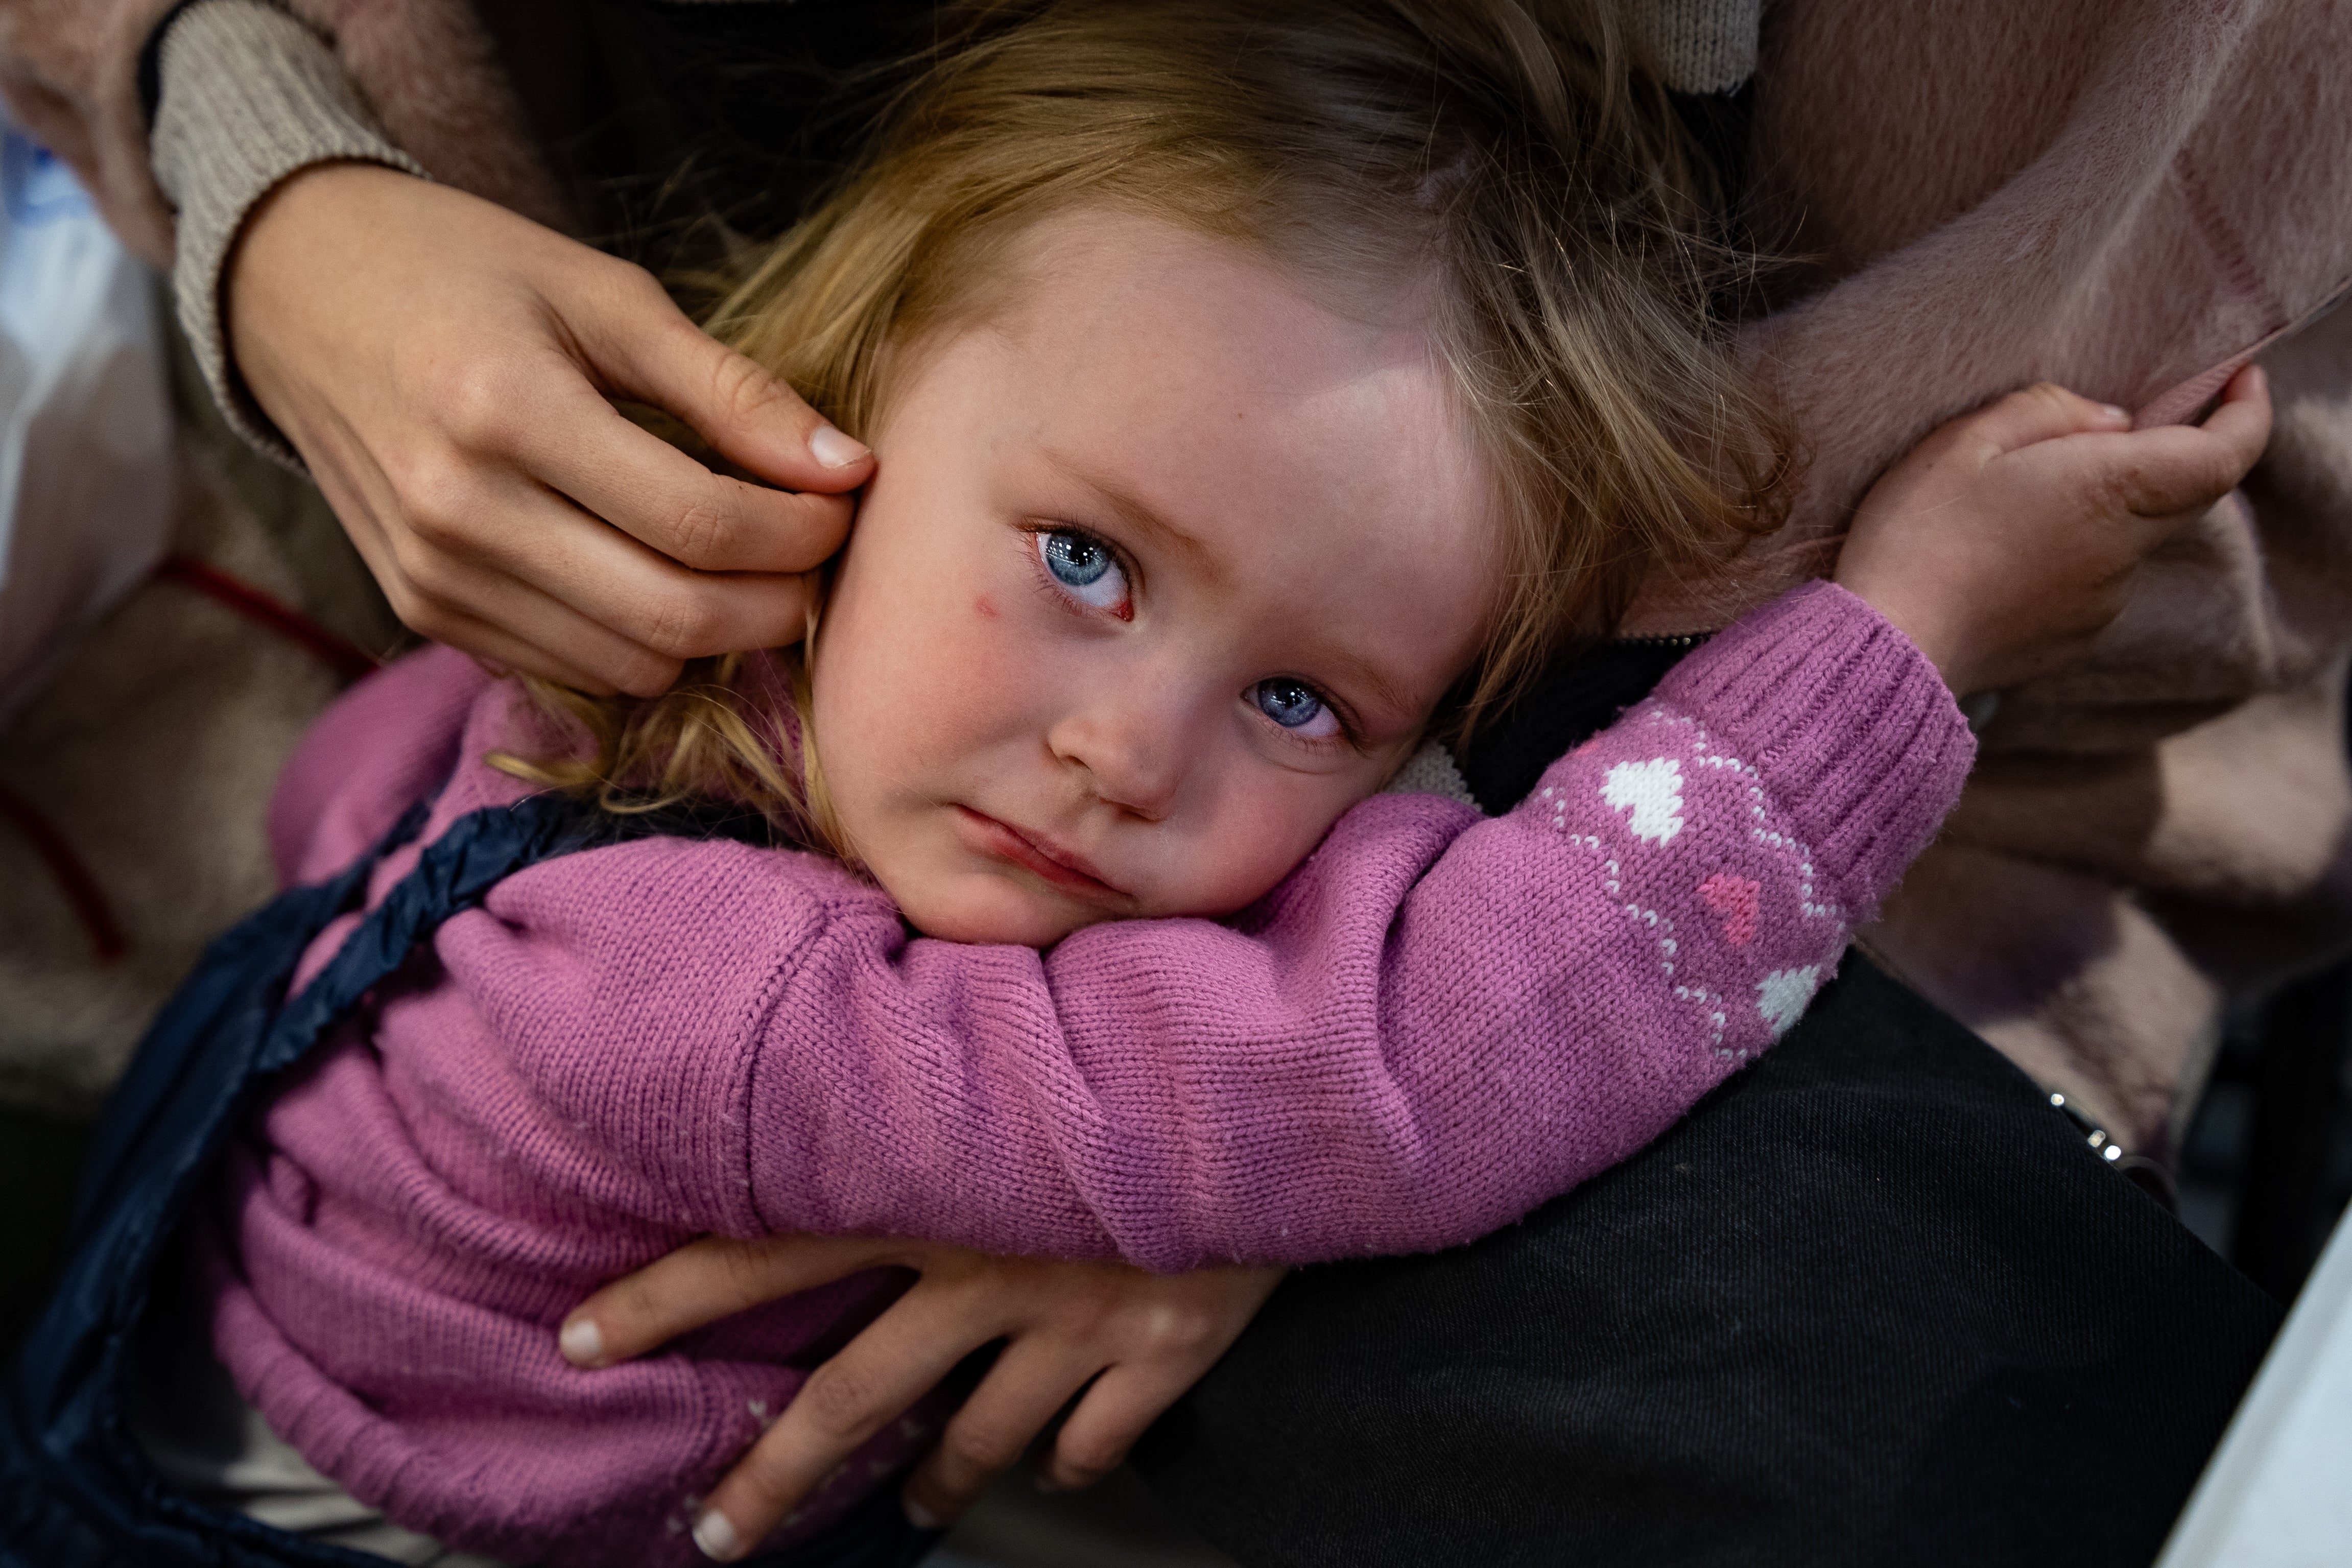 Paulina, 2, is comforted by her sister after fleeing intense shelling in Mariupol